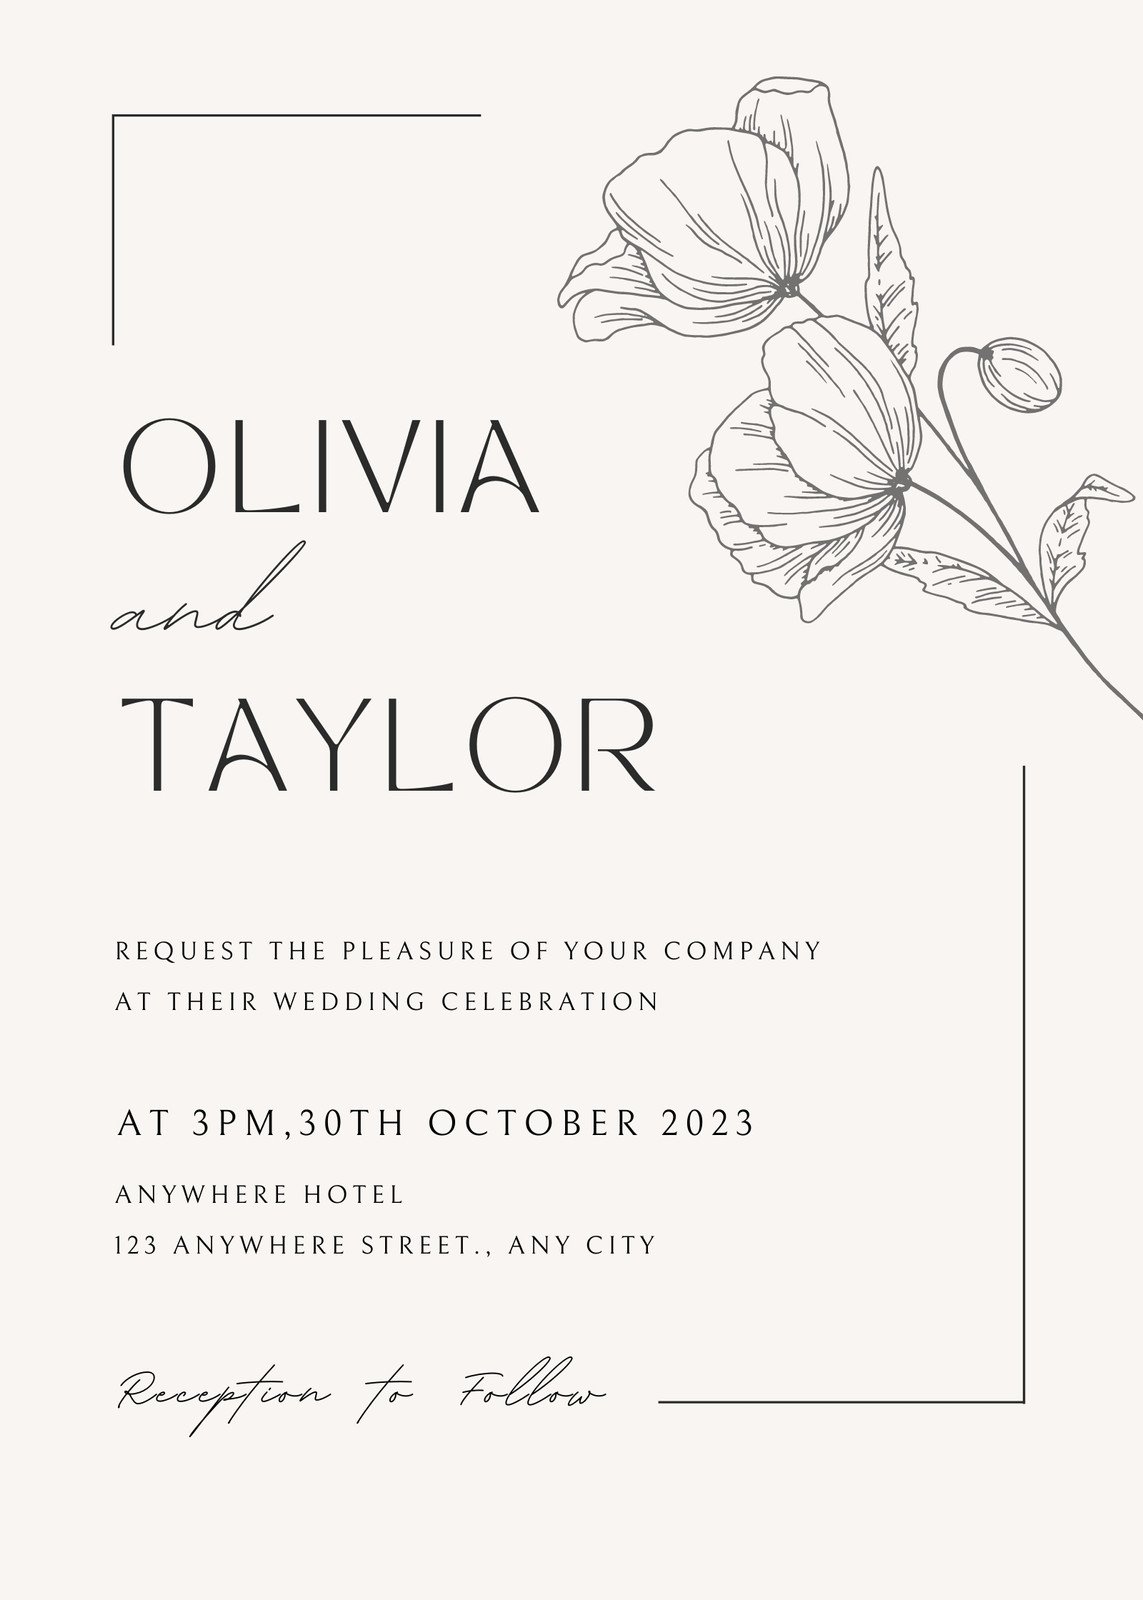 Wedding Invitation Templates To Customize For Free | Canva